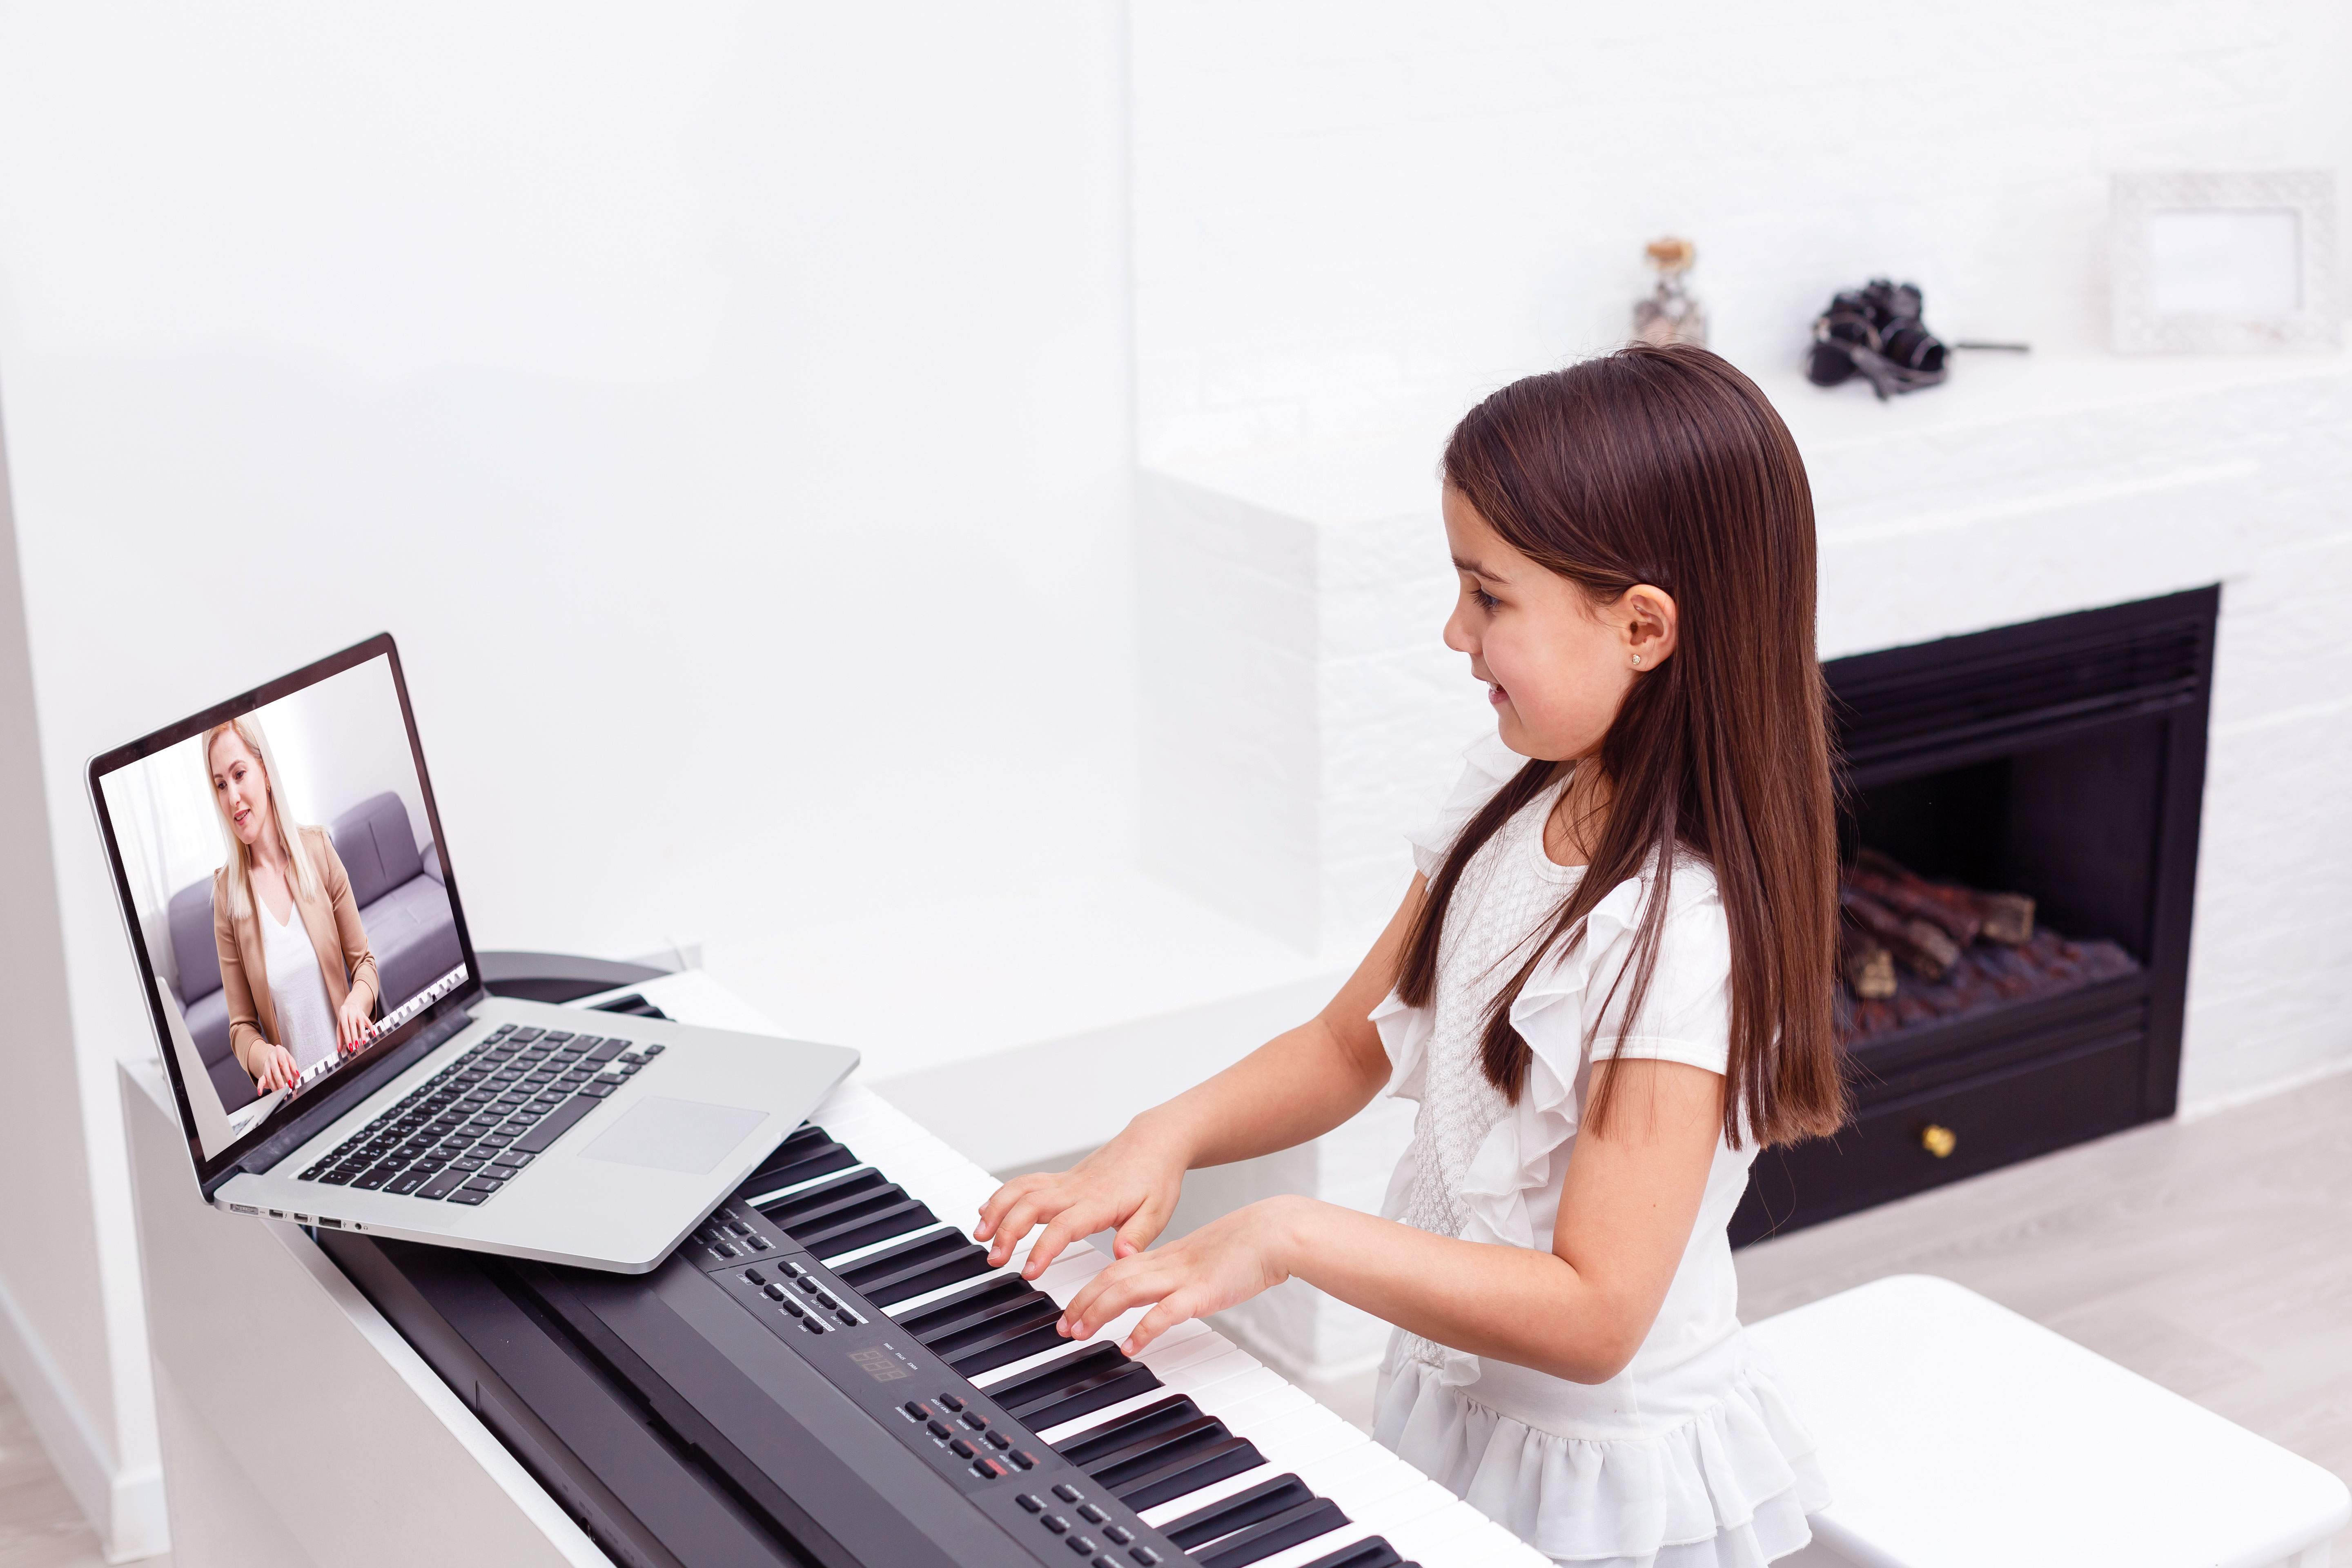 Image of a girl having an online piano lesson smiling at a laptop